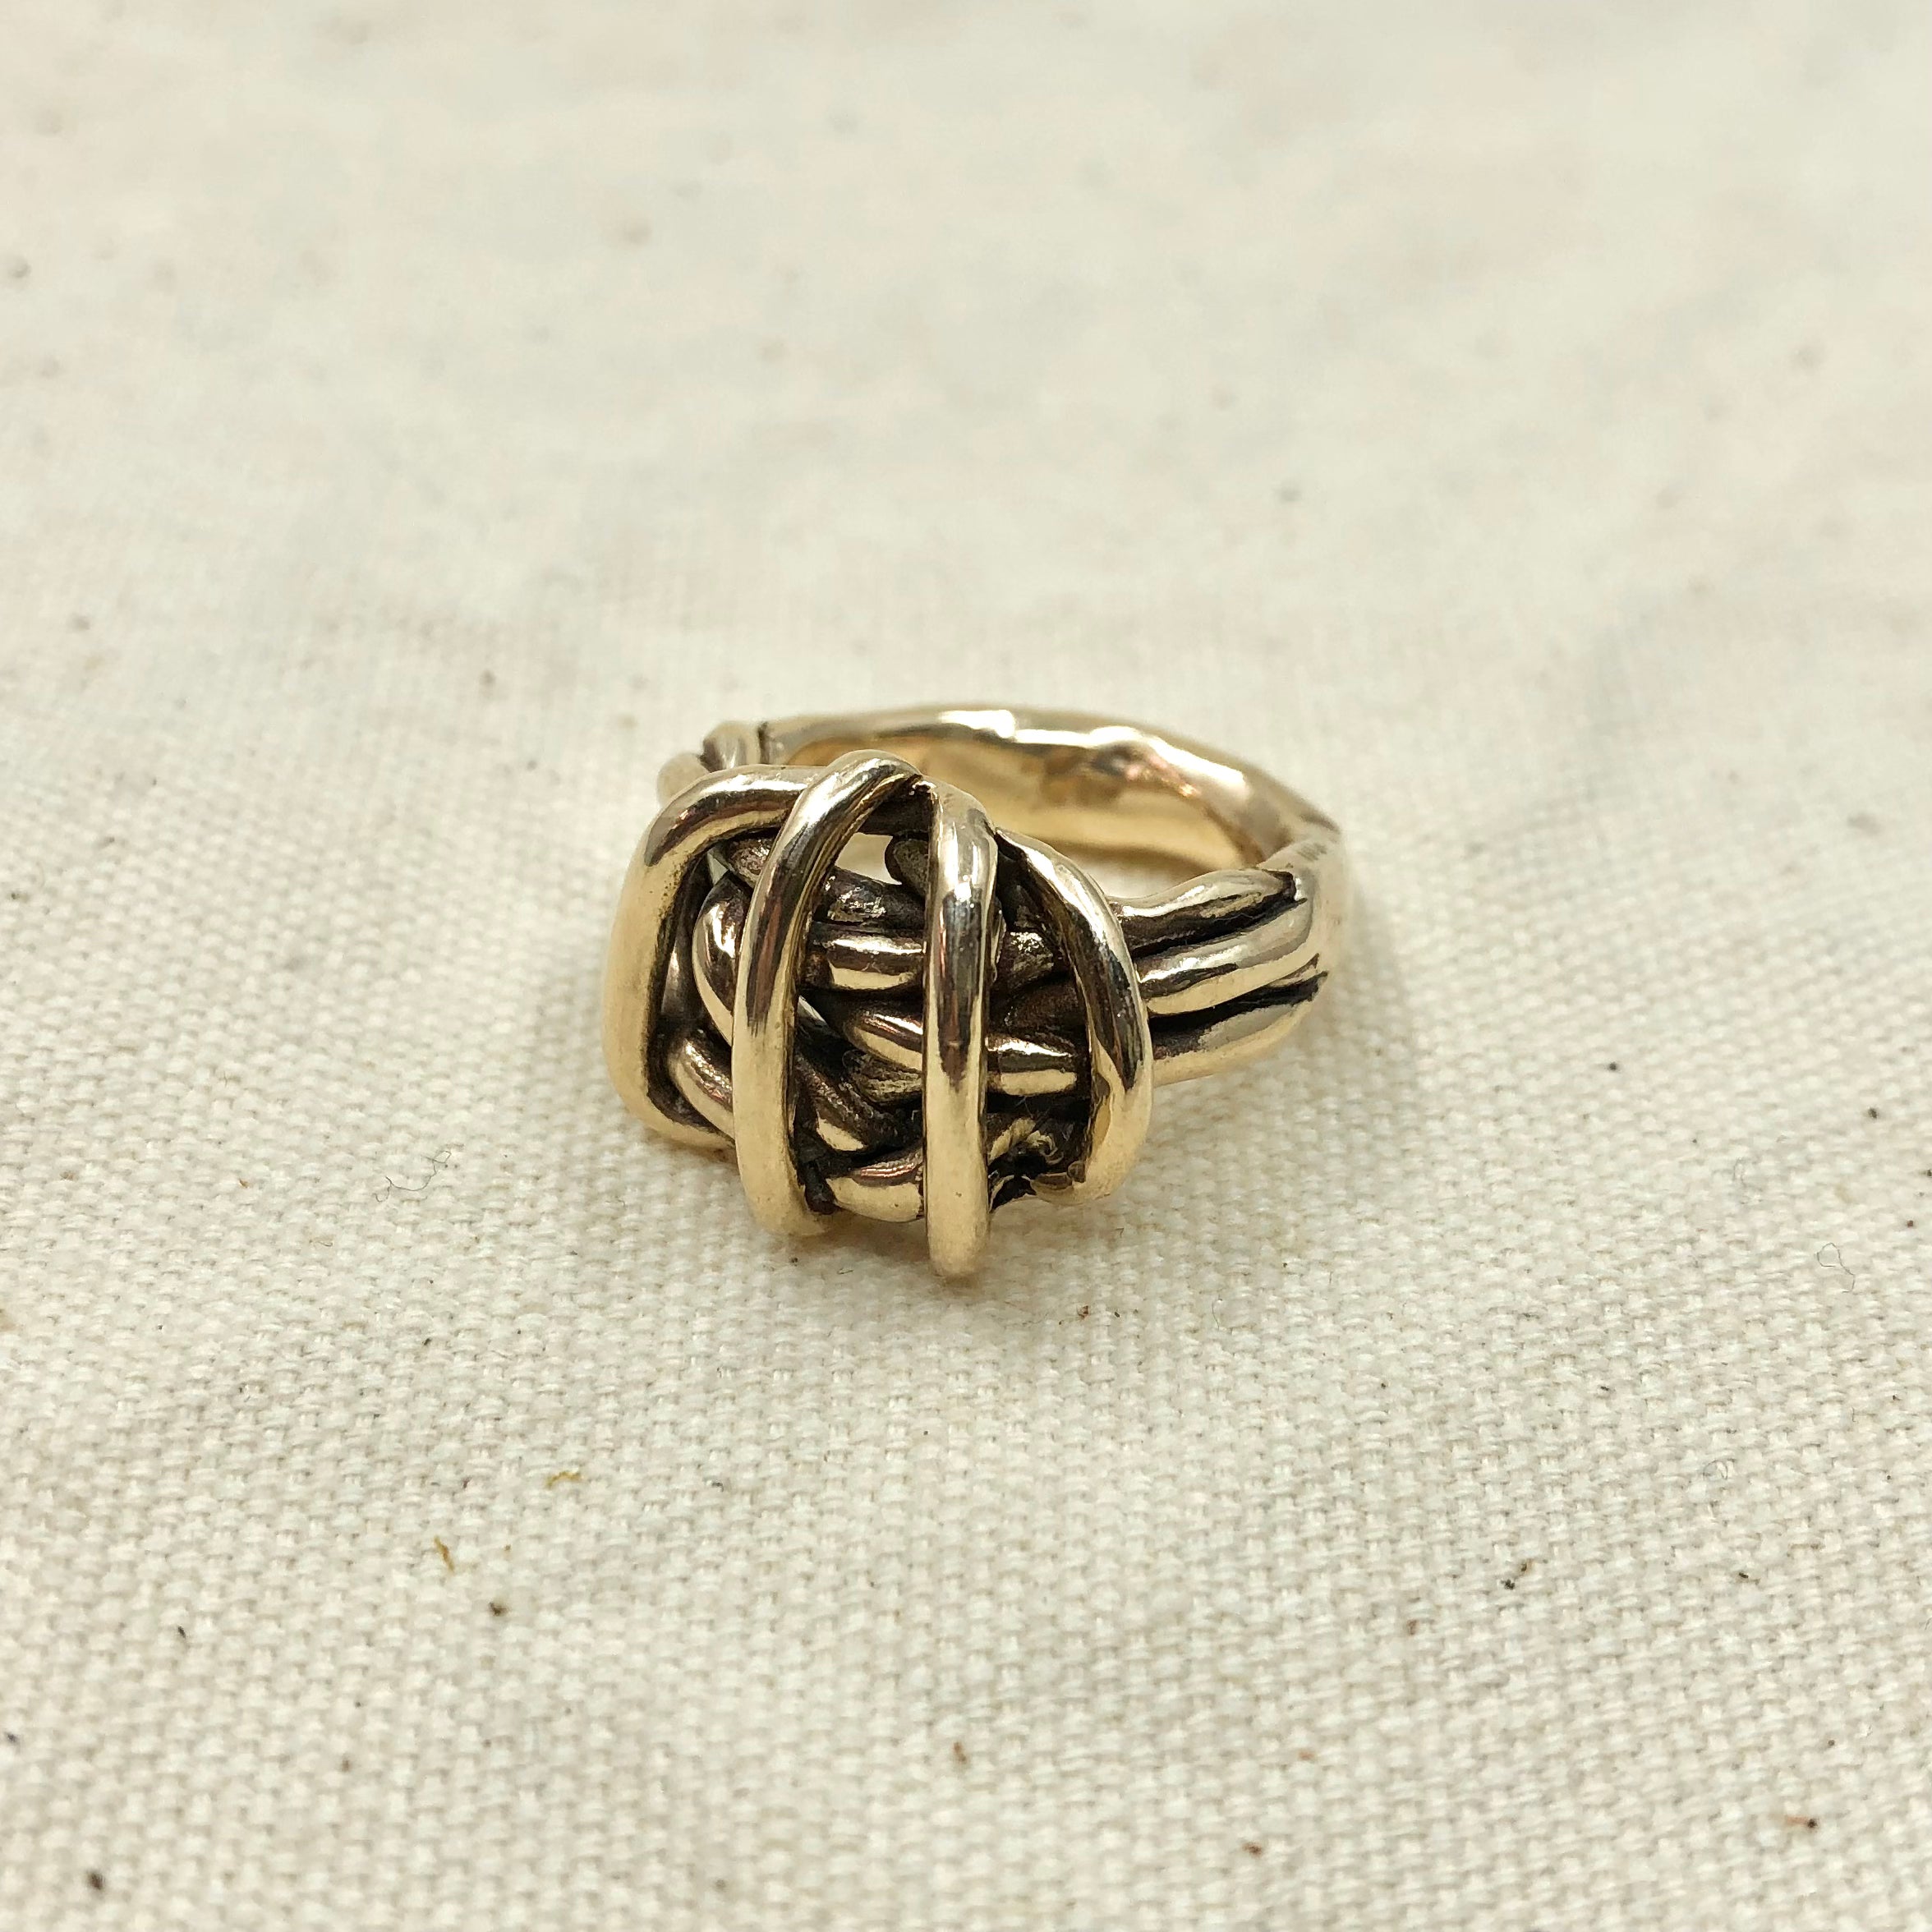 Gold Wire Ring